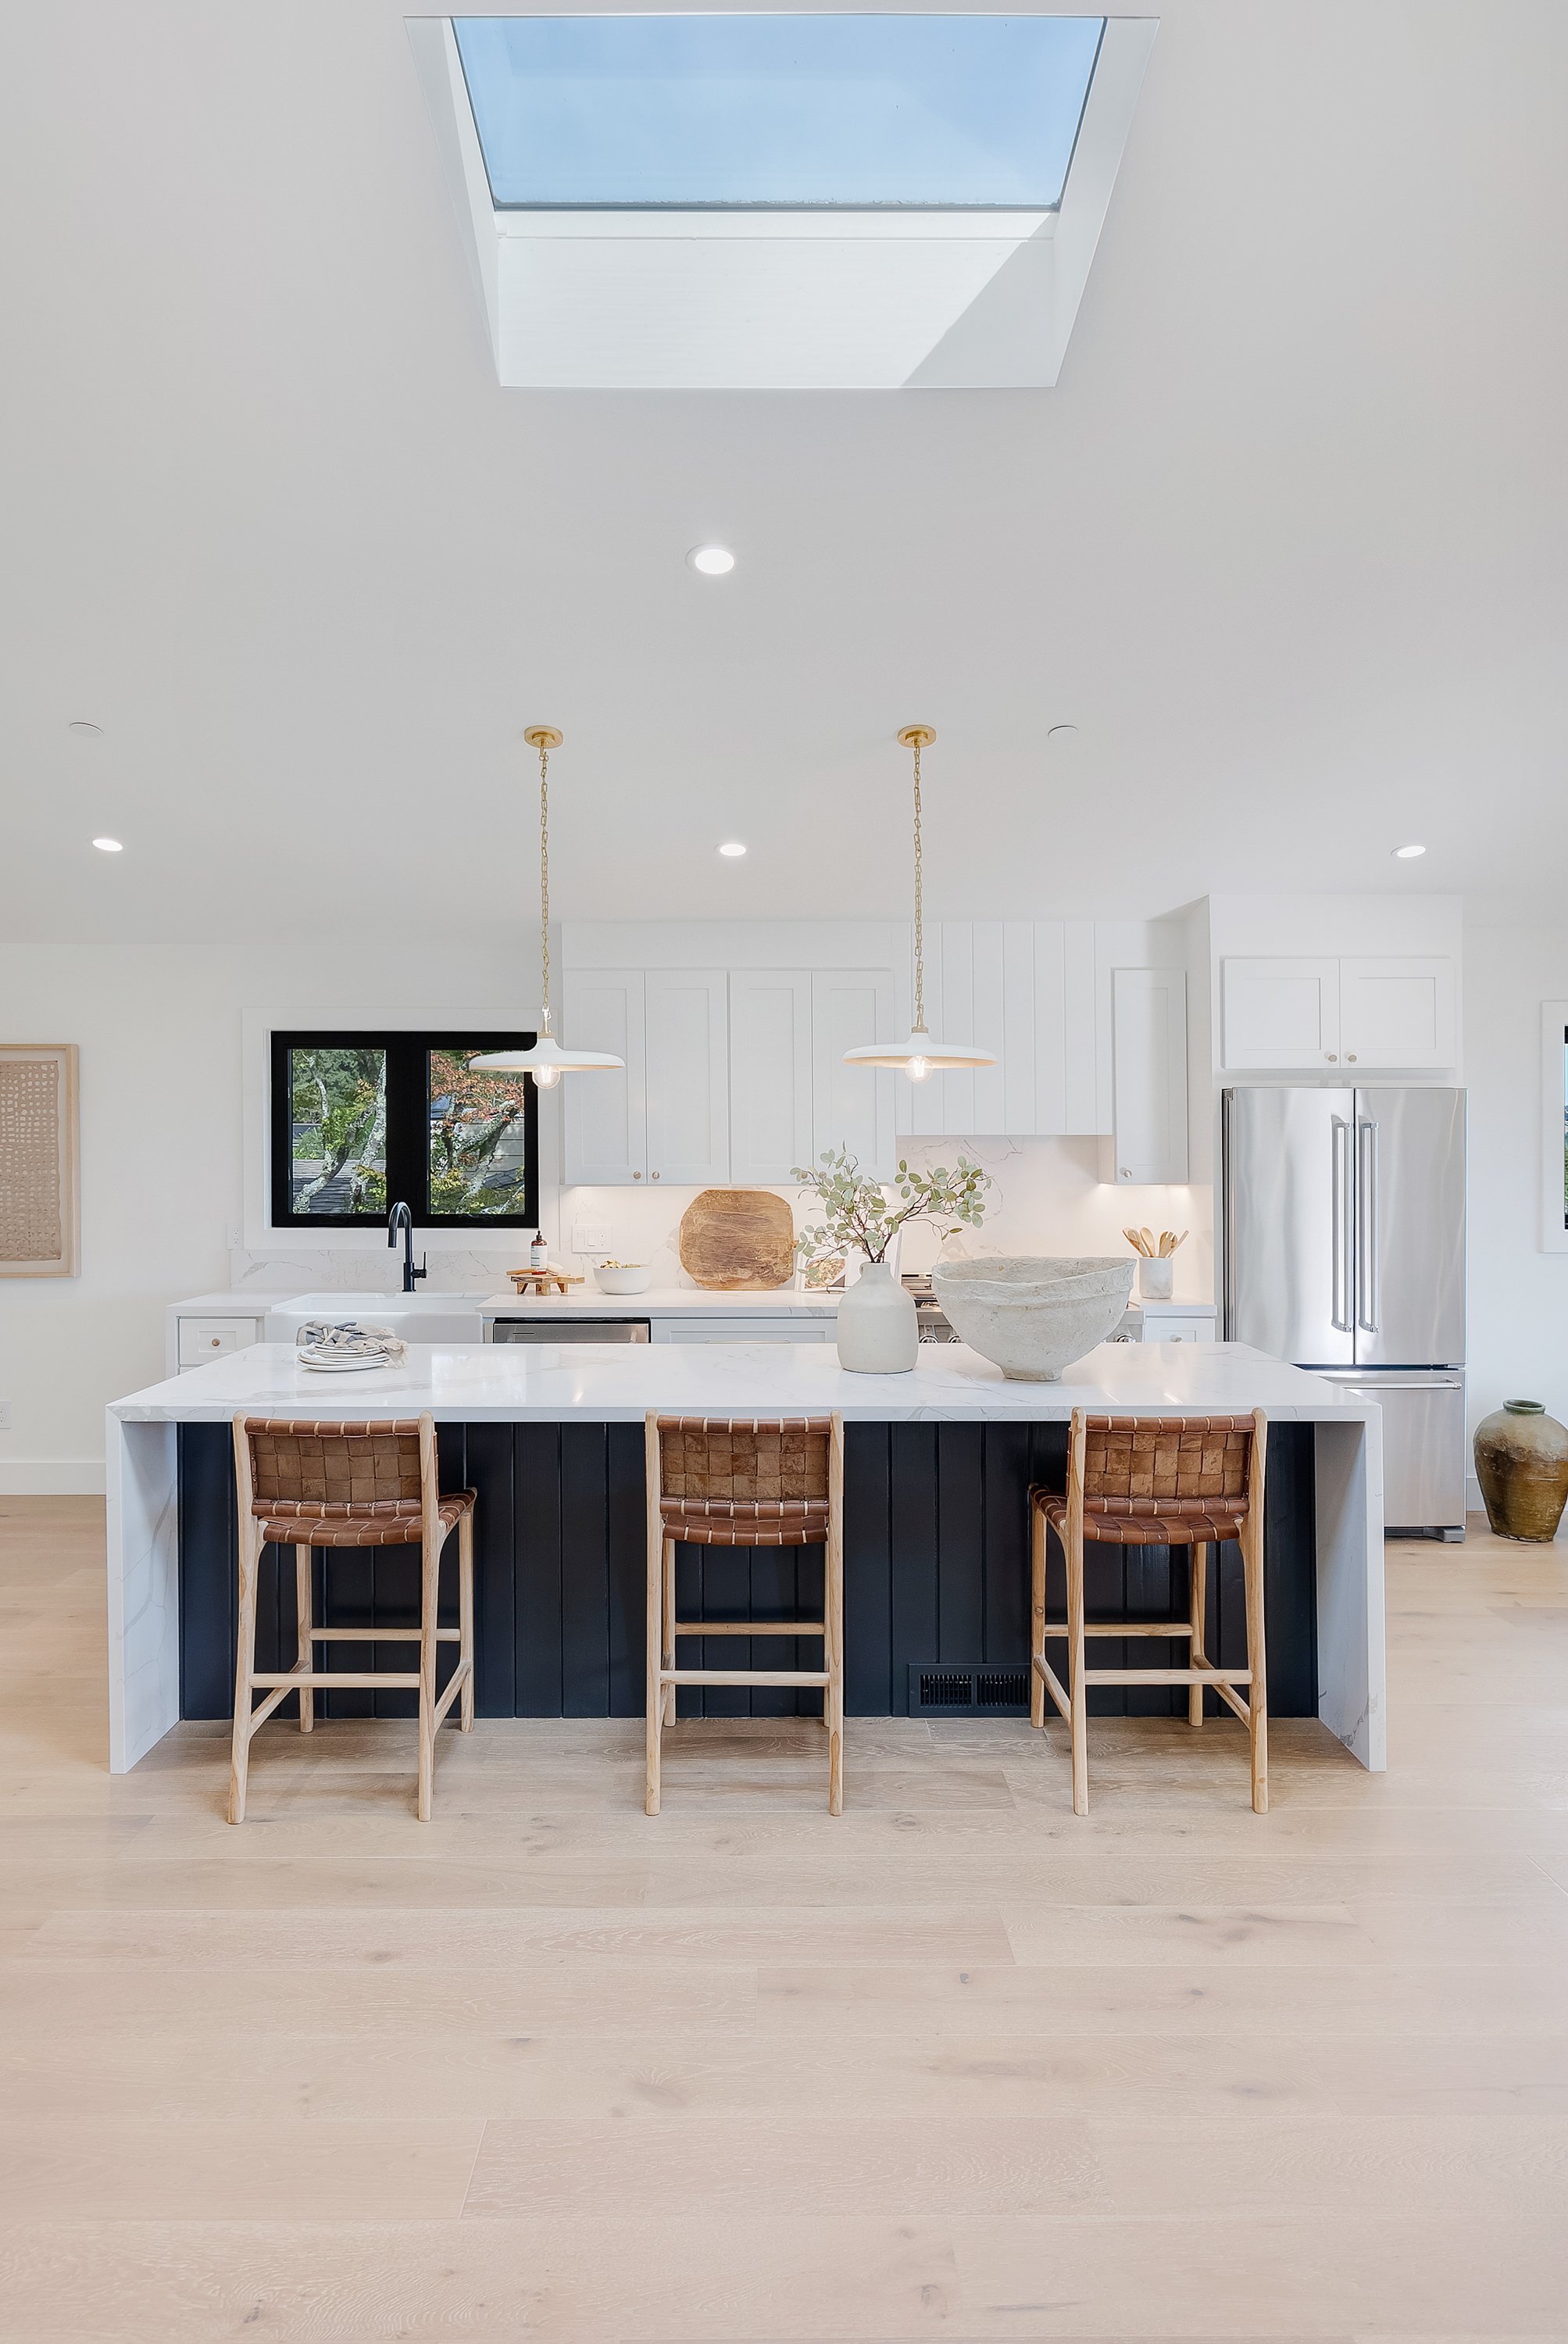 243 Perry Street Mill Valley Real Estate For Sale by Mill Valley Best Realtor Allie Fornesi at Own Marin Real Estate-17.jpg